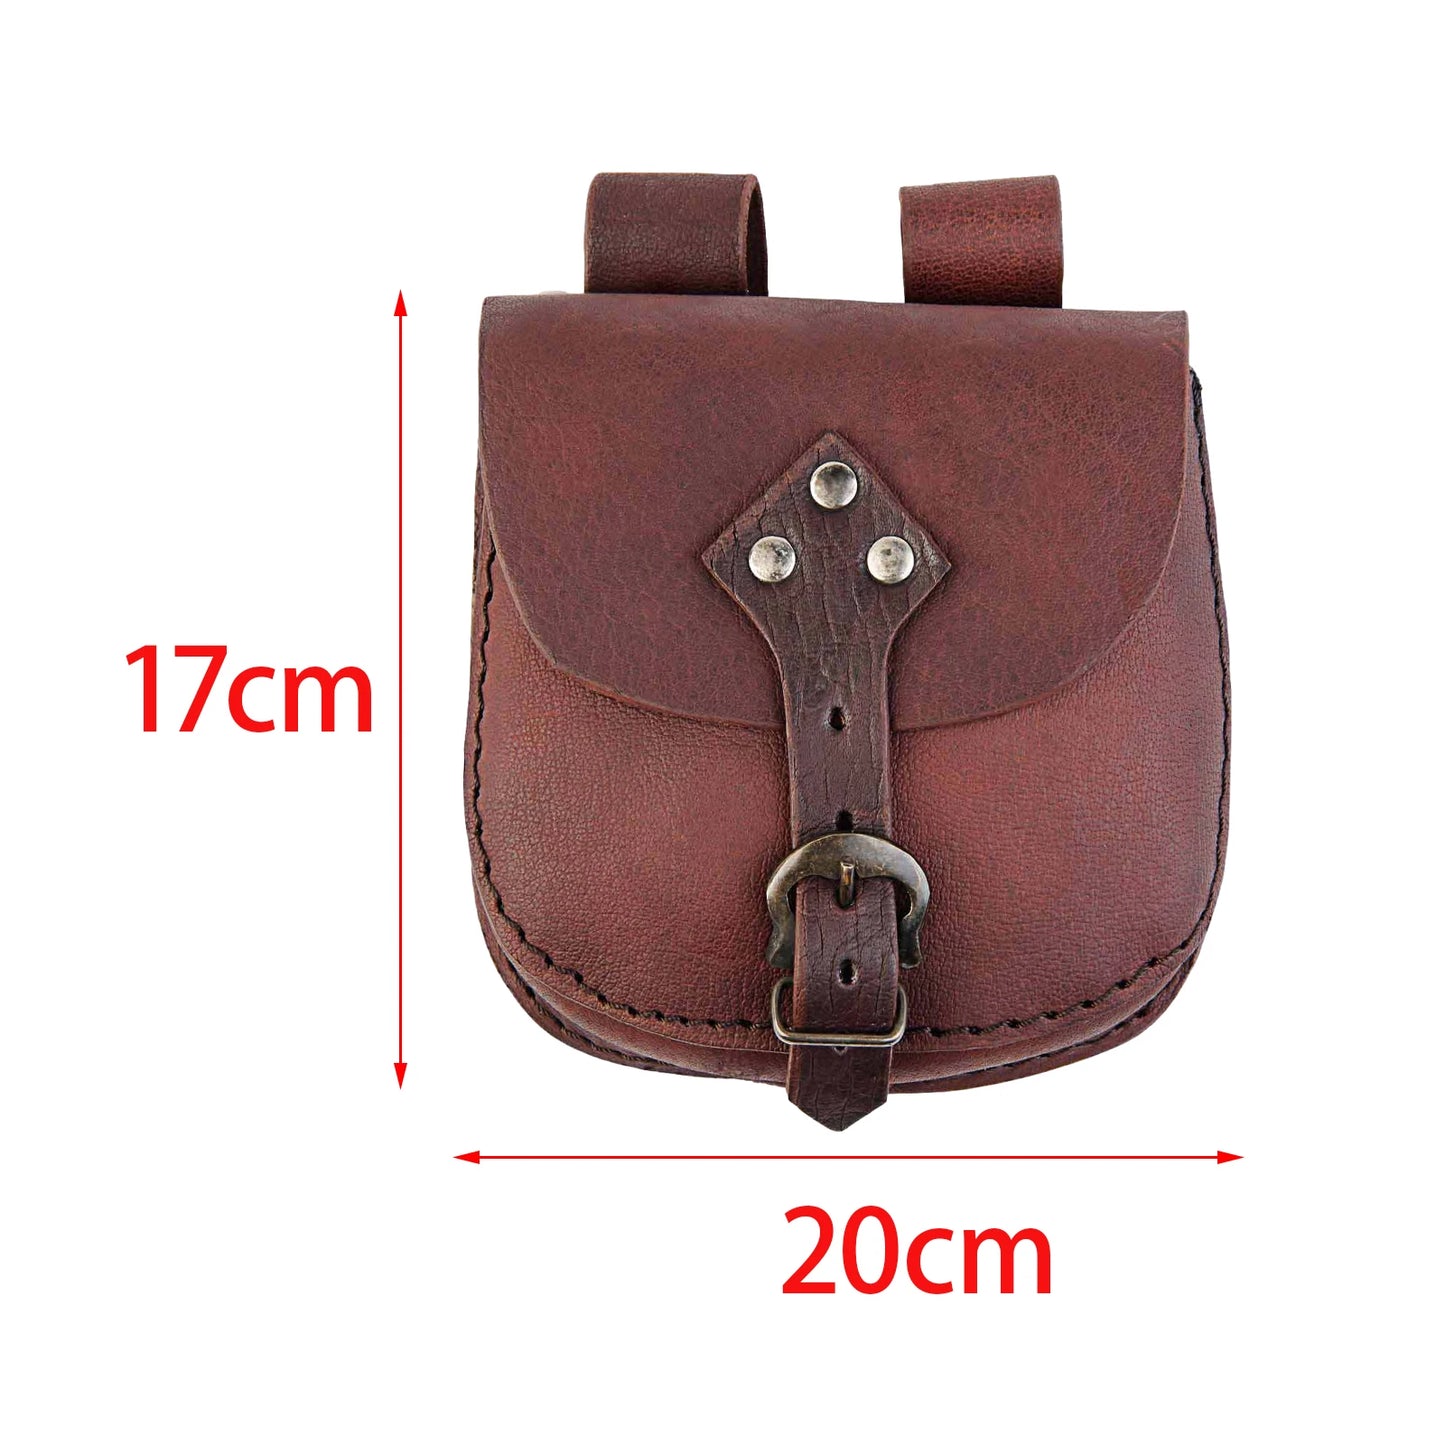 Medieval Waist Bag Purse Steampunk Fanny Pack PU Leather Belt Pouch Waist Pack for Stage Show Men Party Role Playing Women